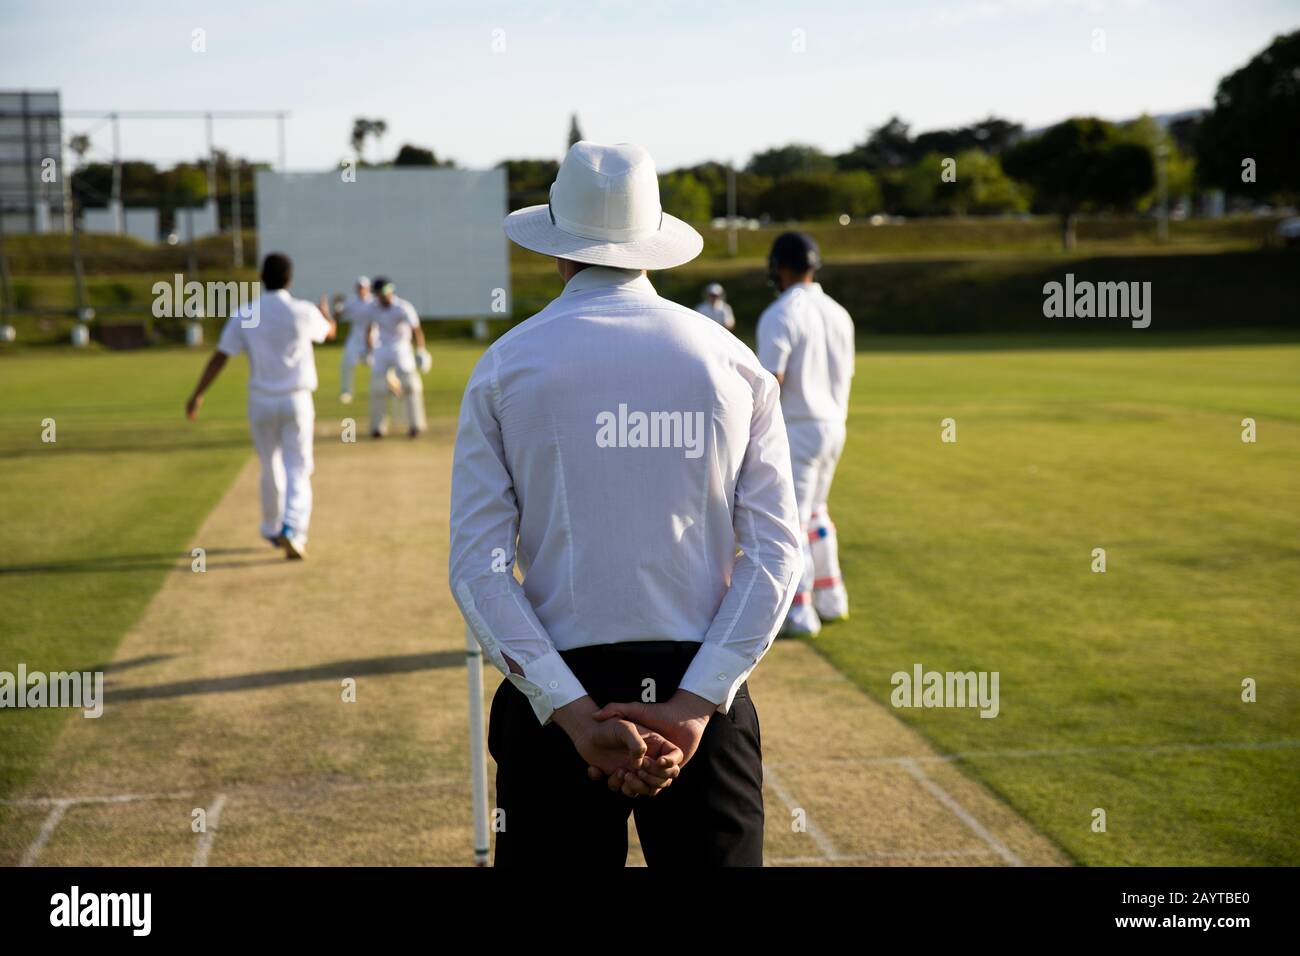 Cricket umpire watching the players during match Stock Photo